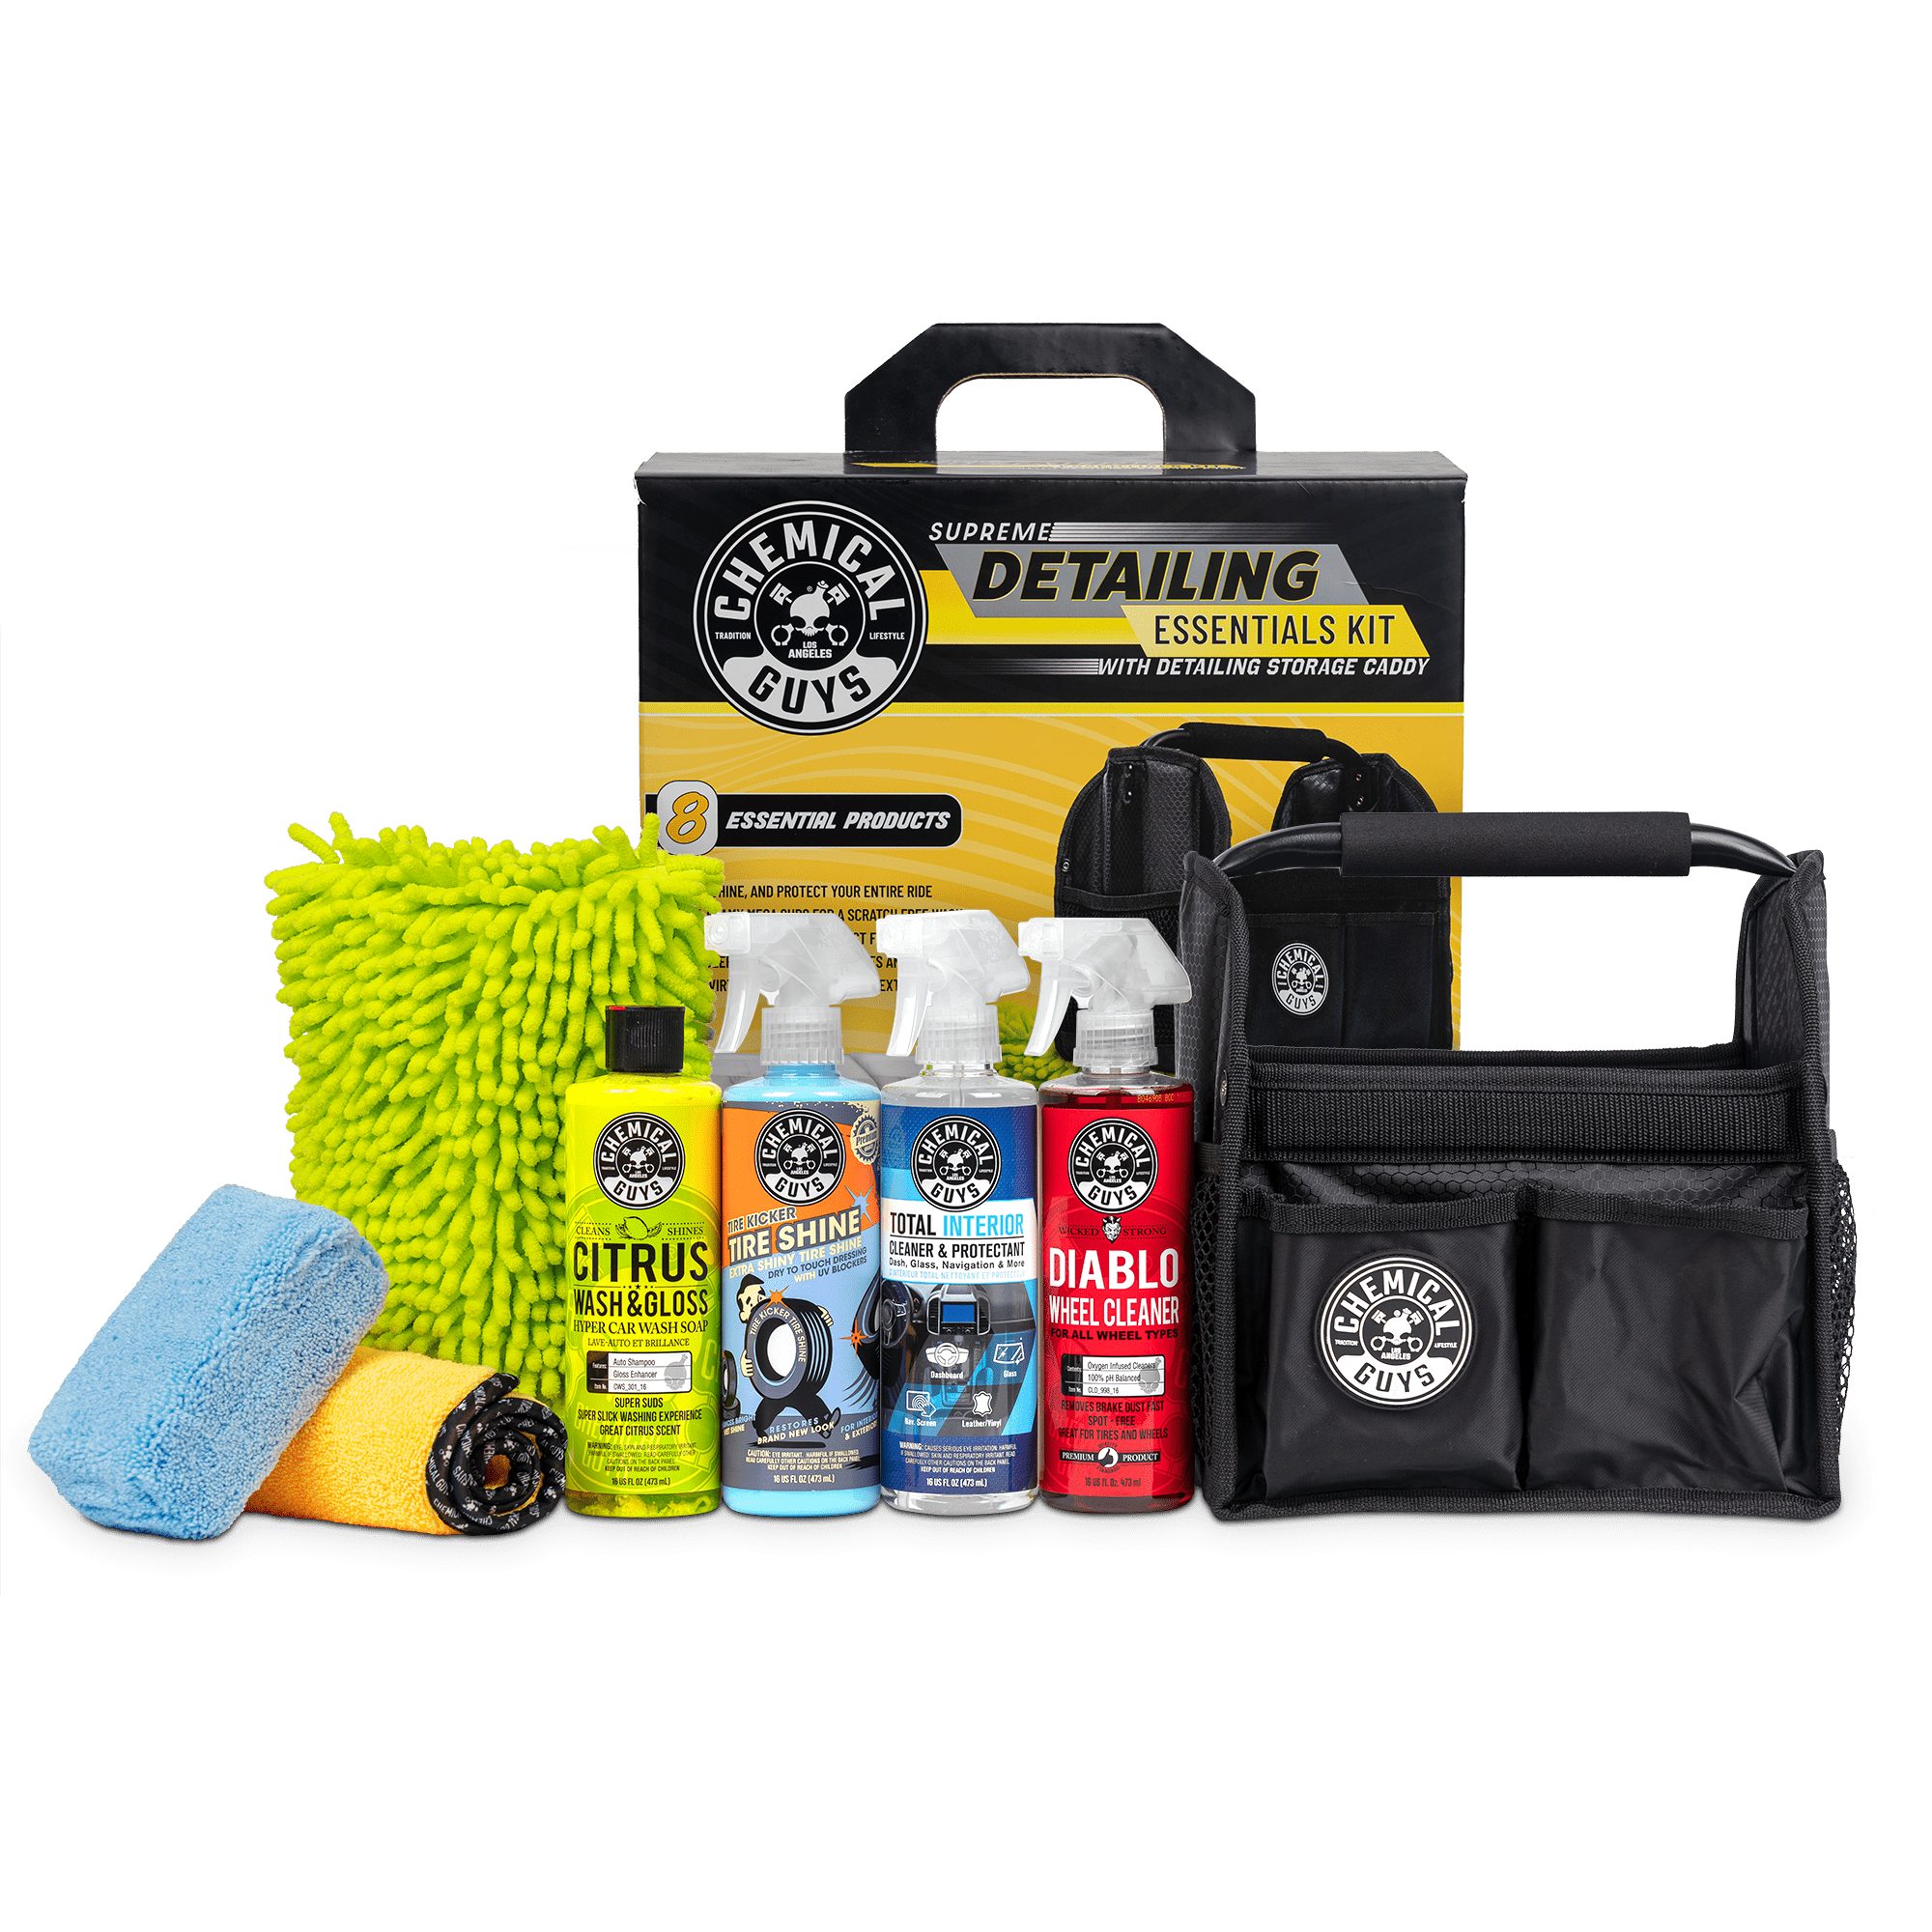 Chemical Guys Supreme Detailing Essentials Kit with Detailing Storage Caddy